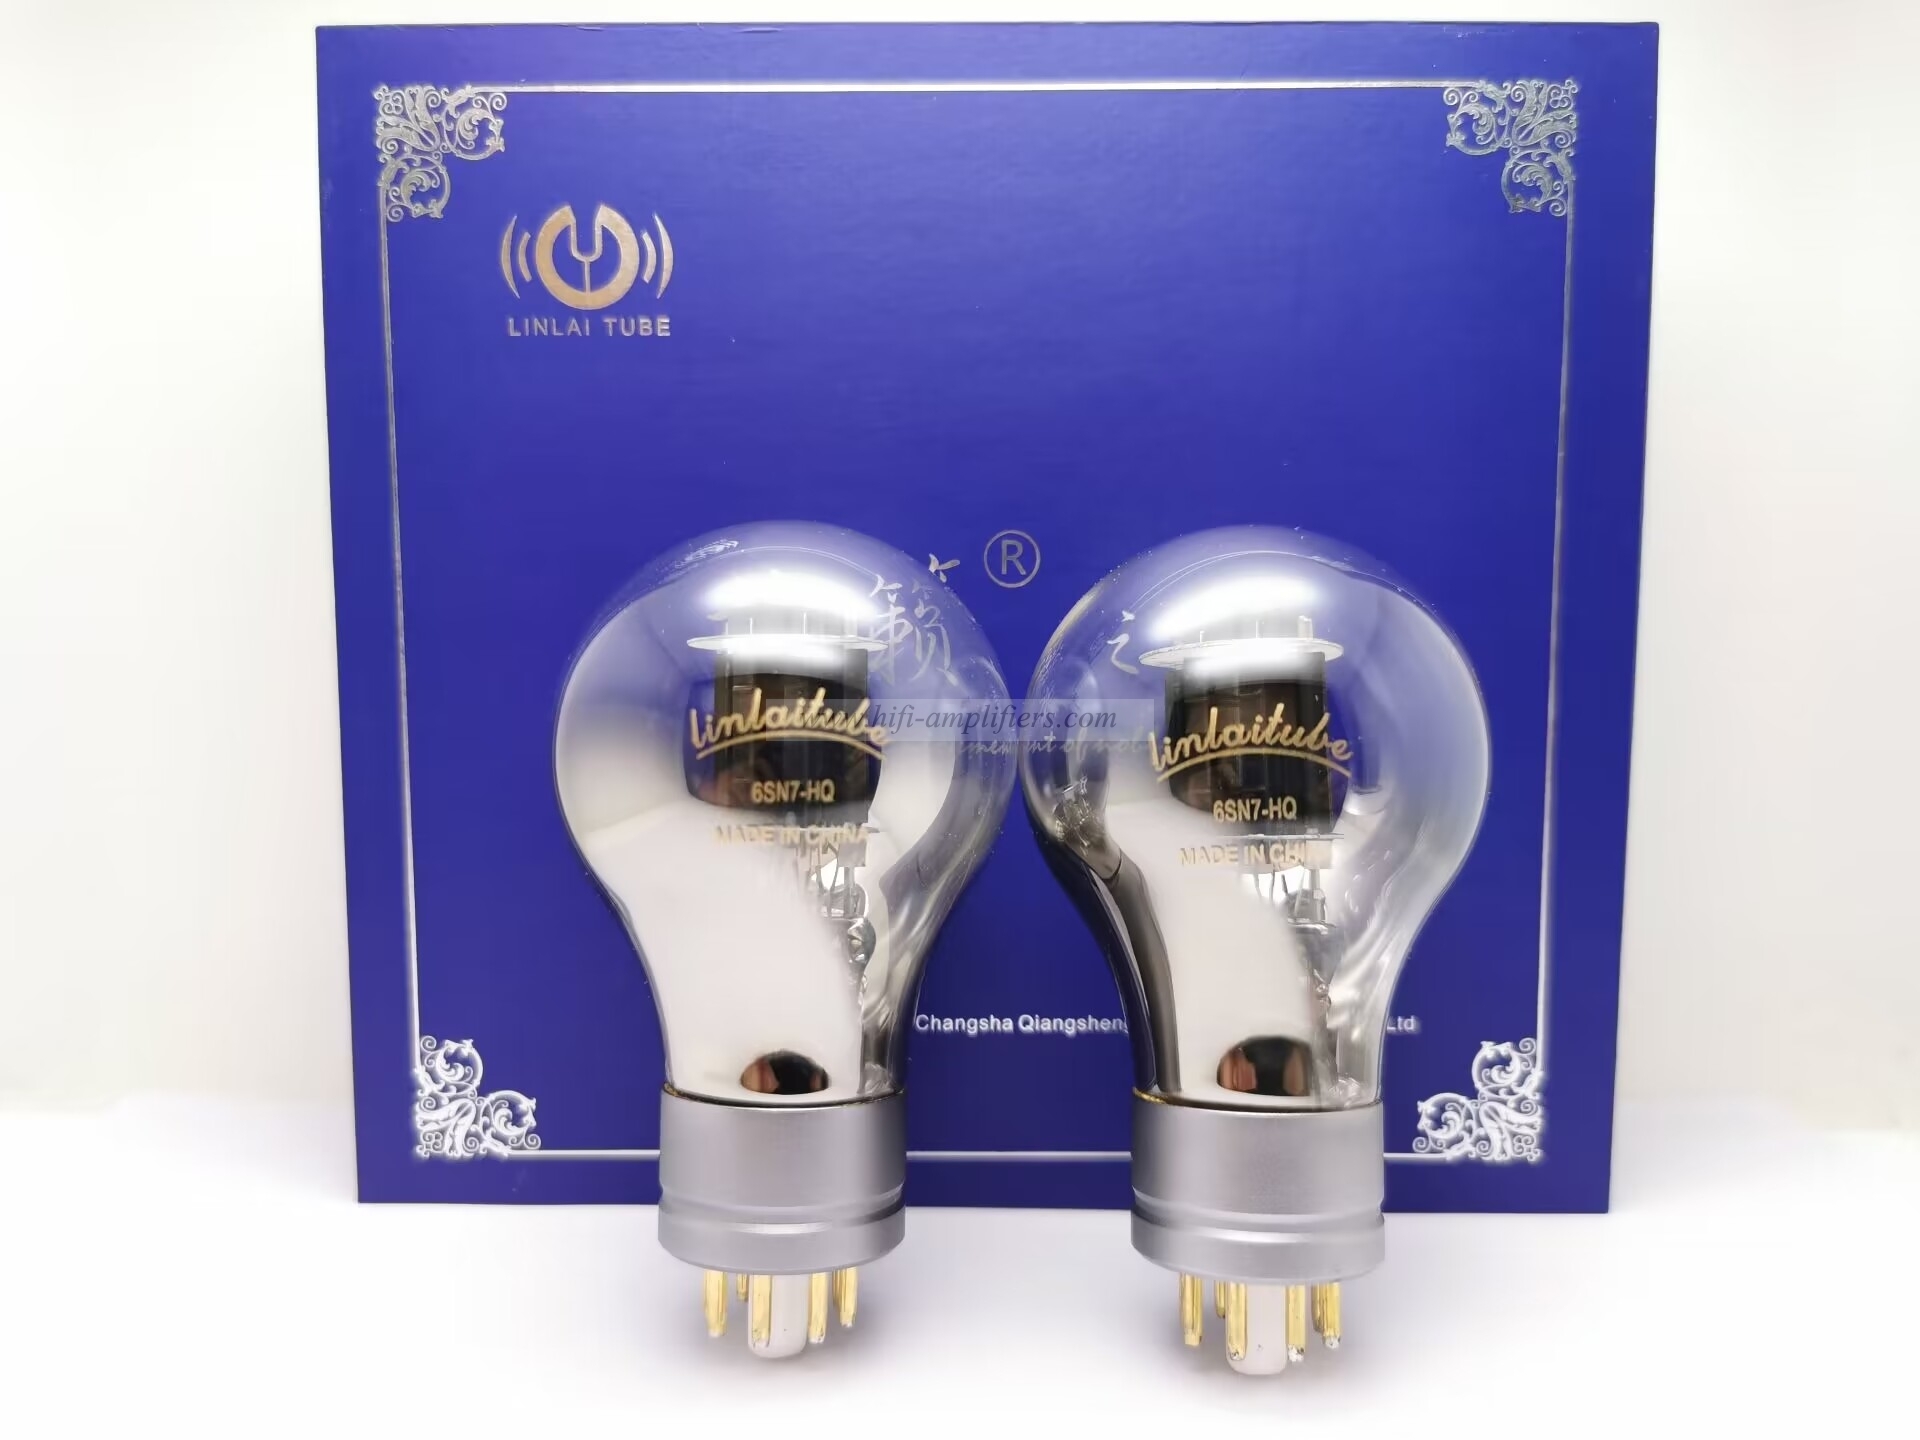 LINLAI 6SN7-HQ Vacuum Tube Hi-end Electronic tube value Matched Pair